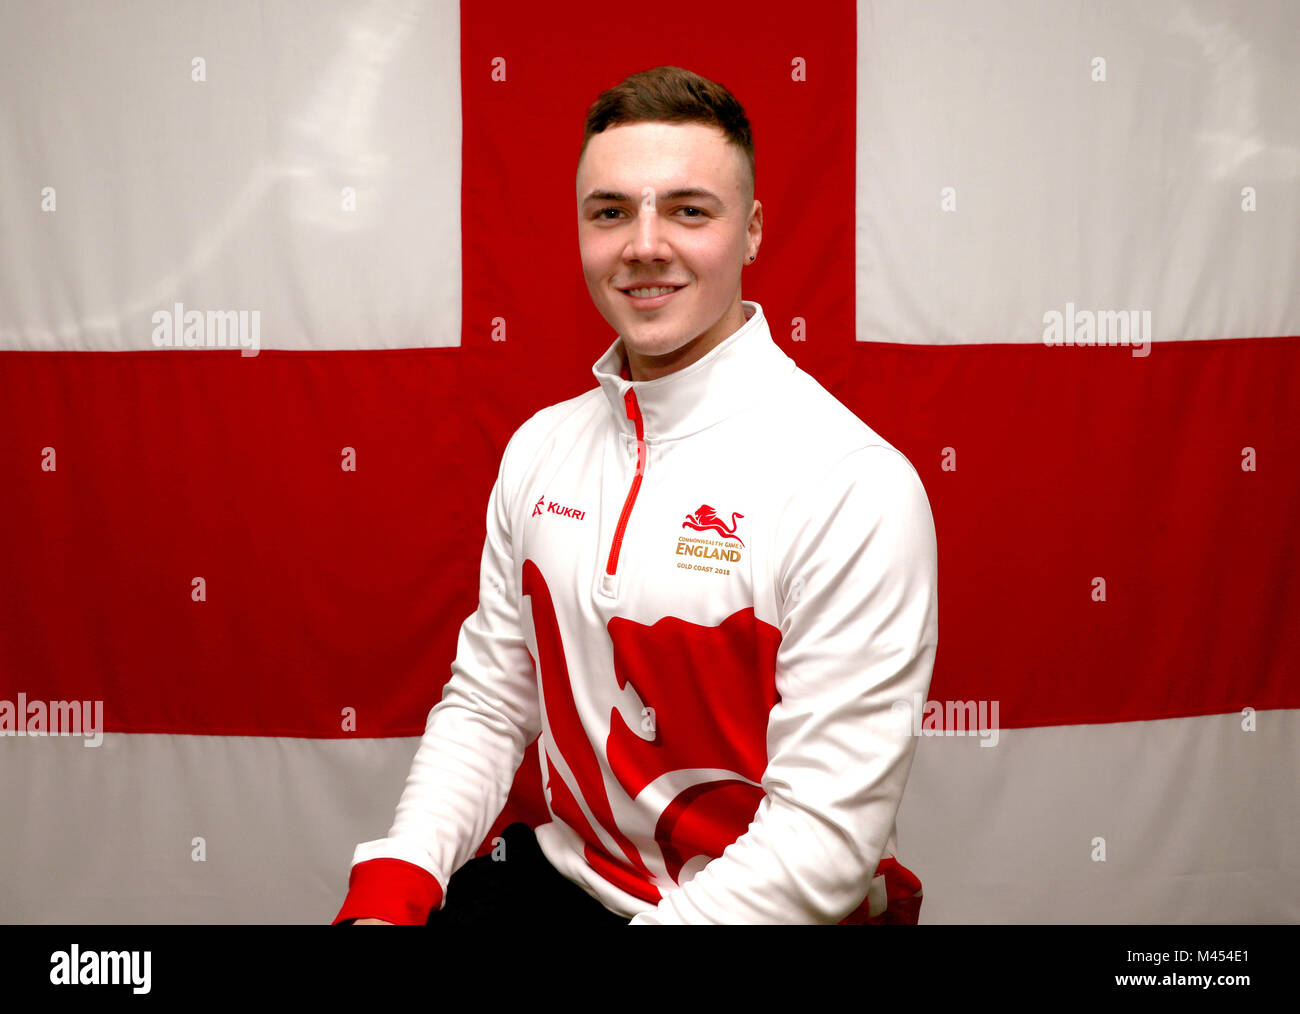 Team England's Jarvis Parkinson poses for a photo during the kitting out session at Kukri Sports HQ, Preston. Stock Photo